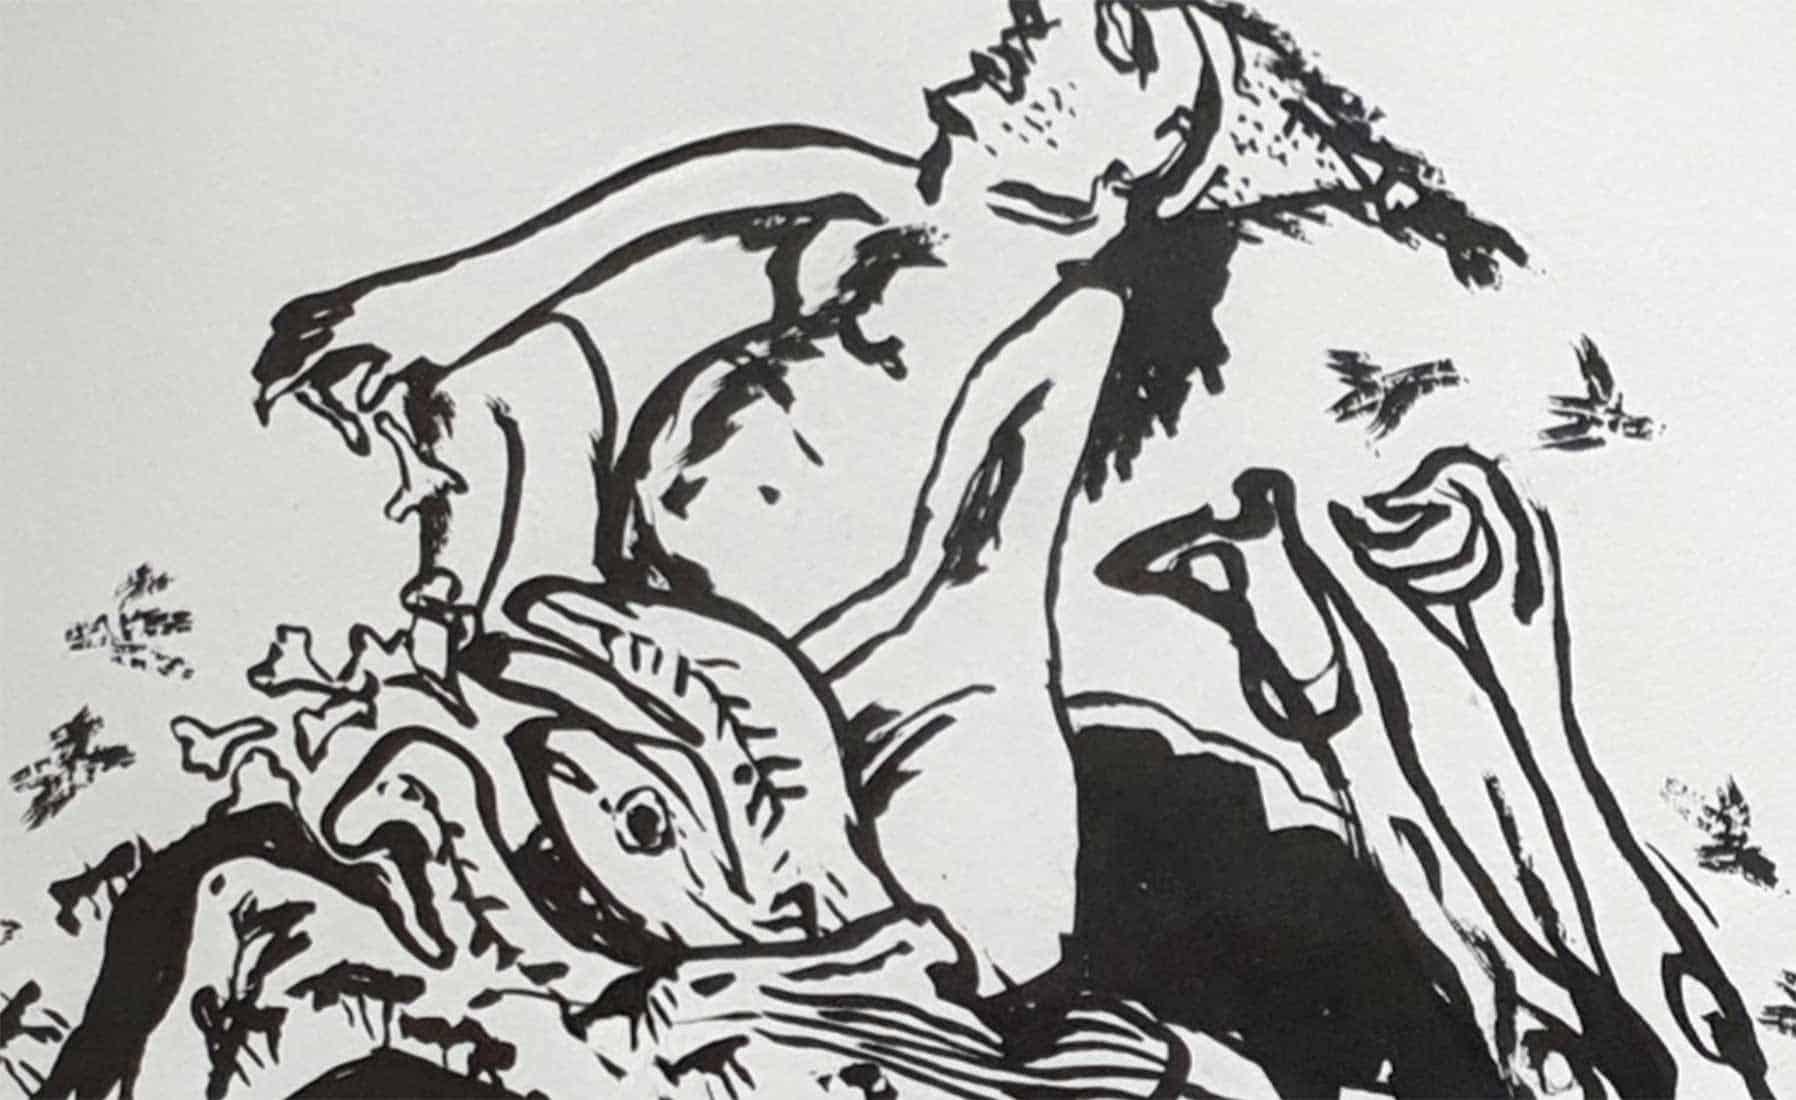 Ashoke Mullick - Untitled - 14 x 17 inches (unframed size)
Ink on paper
Inclusive of shipment in roll form.

Style : Ashoke Mullick is considered one of the leading painters from the Bengal School of Art. Mullick combines a sense of satire with